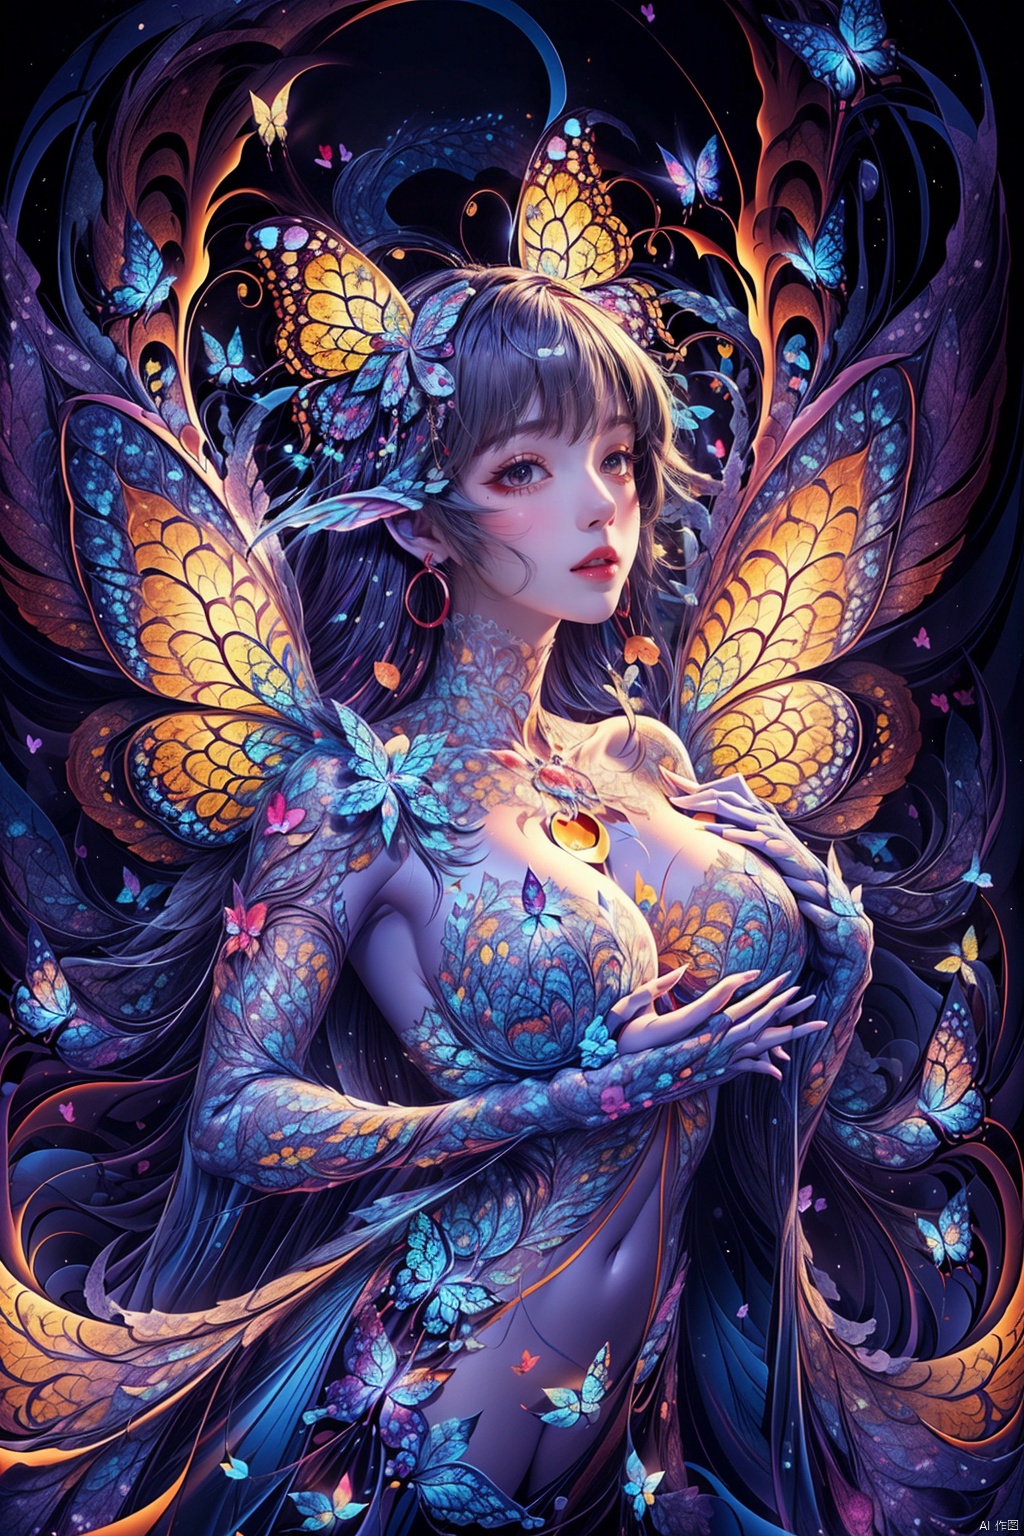  8k, masterpiece, high quality, highly detailed, (1 beautiful girl),(beautiful face), (Metamorphosis from girl to butterflies), (Girl silhouette composed of many butterflies
(Feathered butterfly body, collapse body(Upper body retains human features, Lower body dissolves into butterflies vortex):1.4), (ethereal vortex of many colorful butterflies:1.3), a  huge butterfly wings emerging, Mystical ambiance, surreal atmosphere), (fractal art:1.4), (time reversal), (chakra:1.1), (Surrealism painting(Surreal elements, Colorful palette, Dreamlike quality, Fluid shapes, Symbolic imagery:1.1)), (crimson lips, lips parted), tattoo, HUBG_Rococo_Style(loanword)